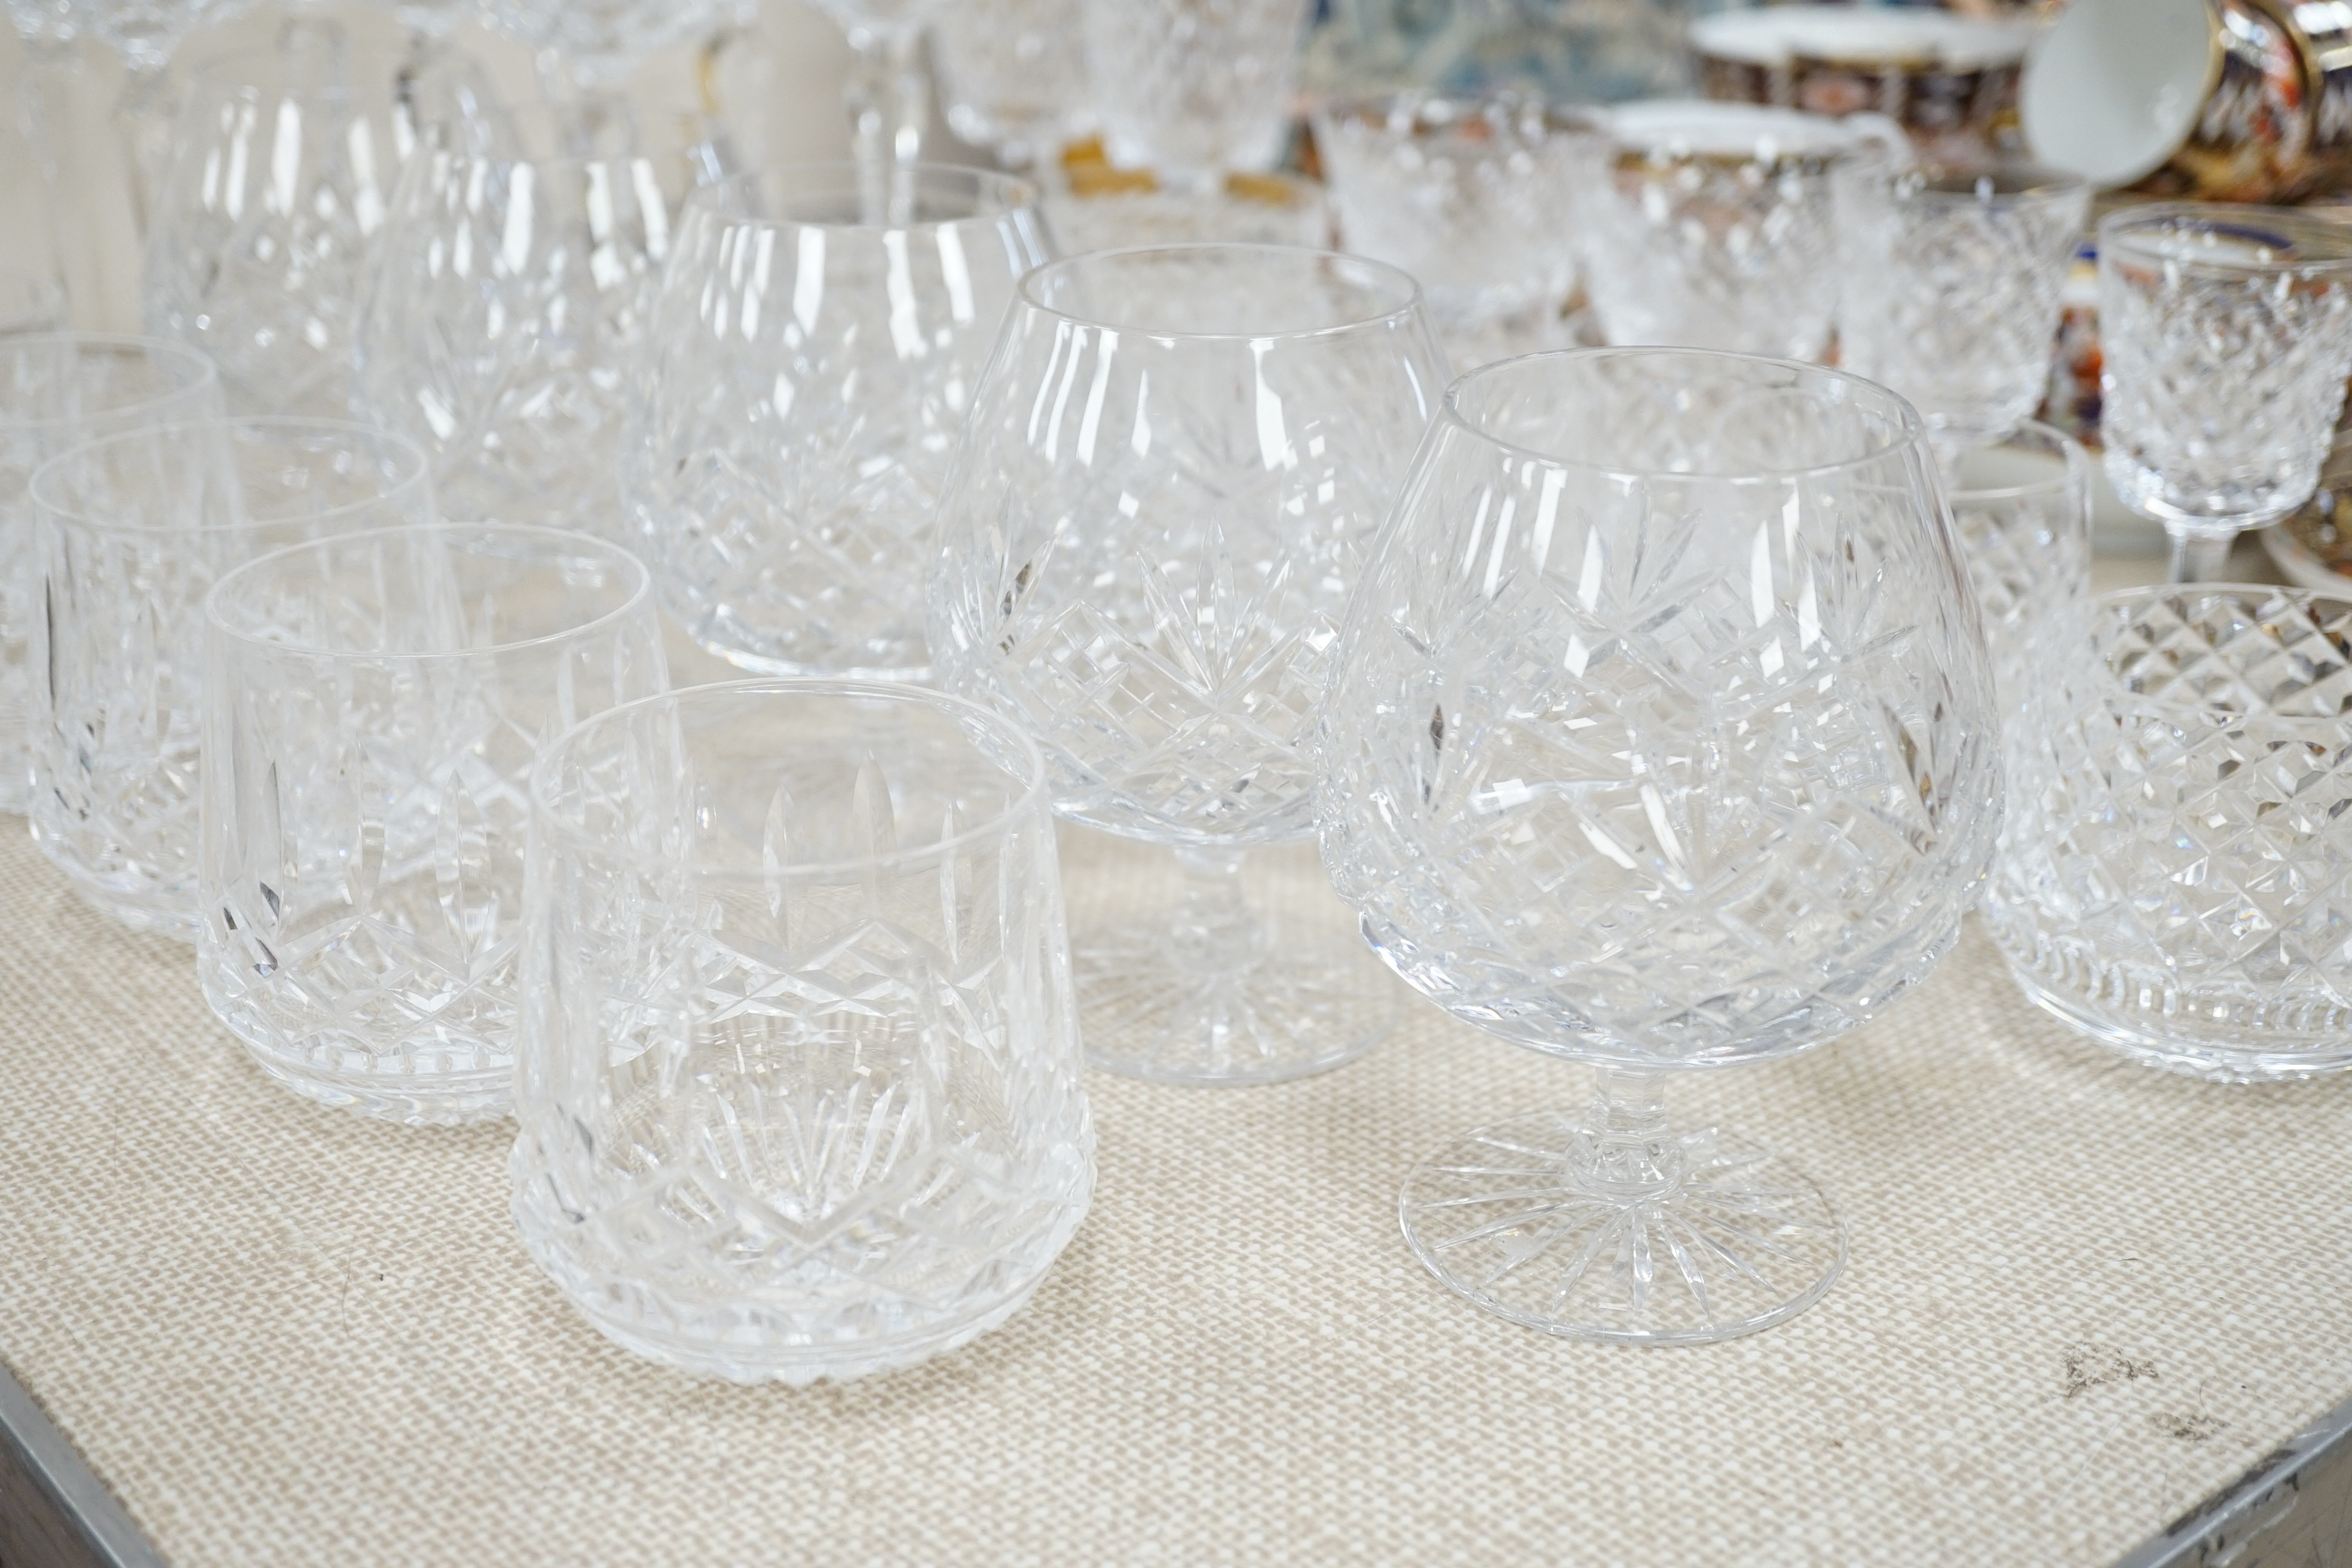 A part suite of Waterford drinking glassware in Alana pattern and others - Image 2 of 4